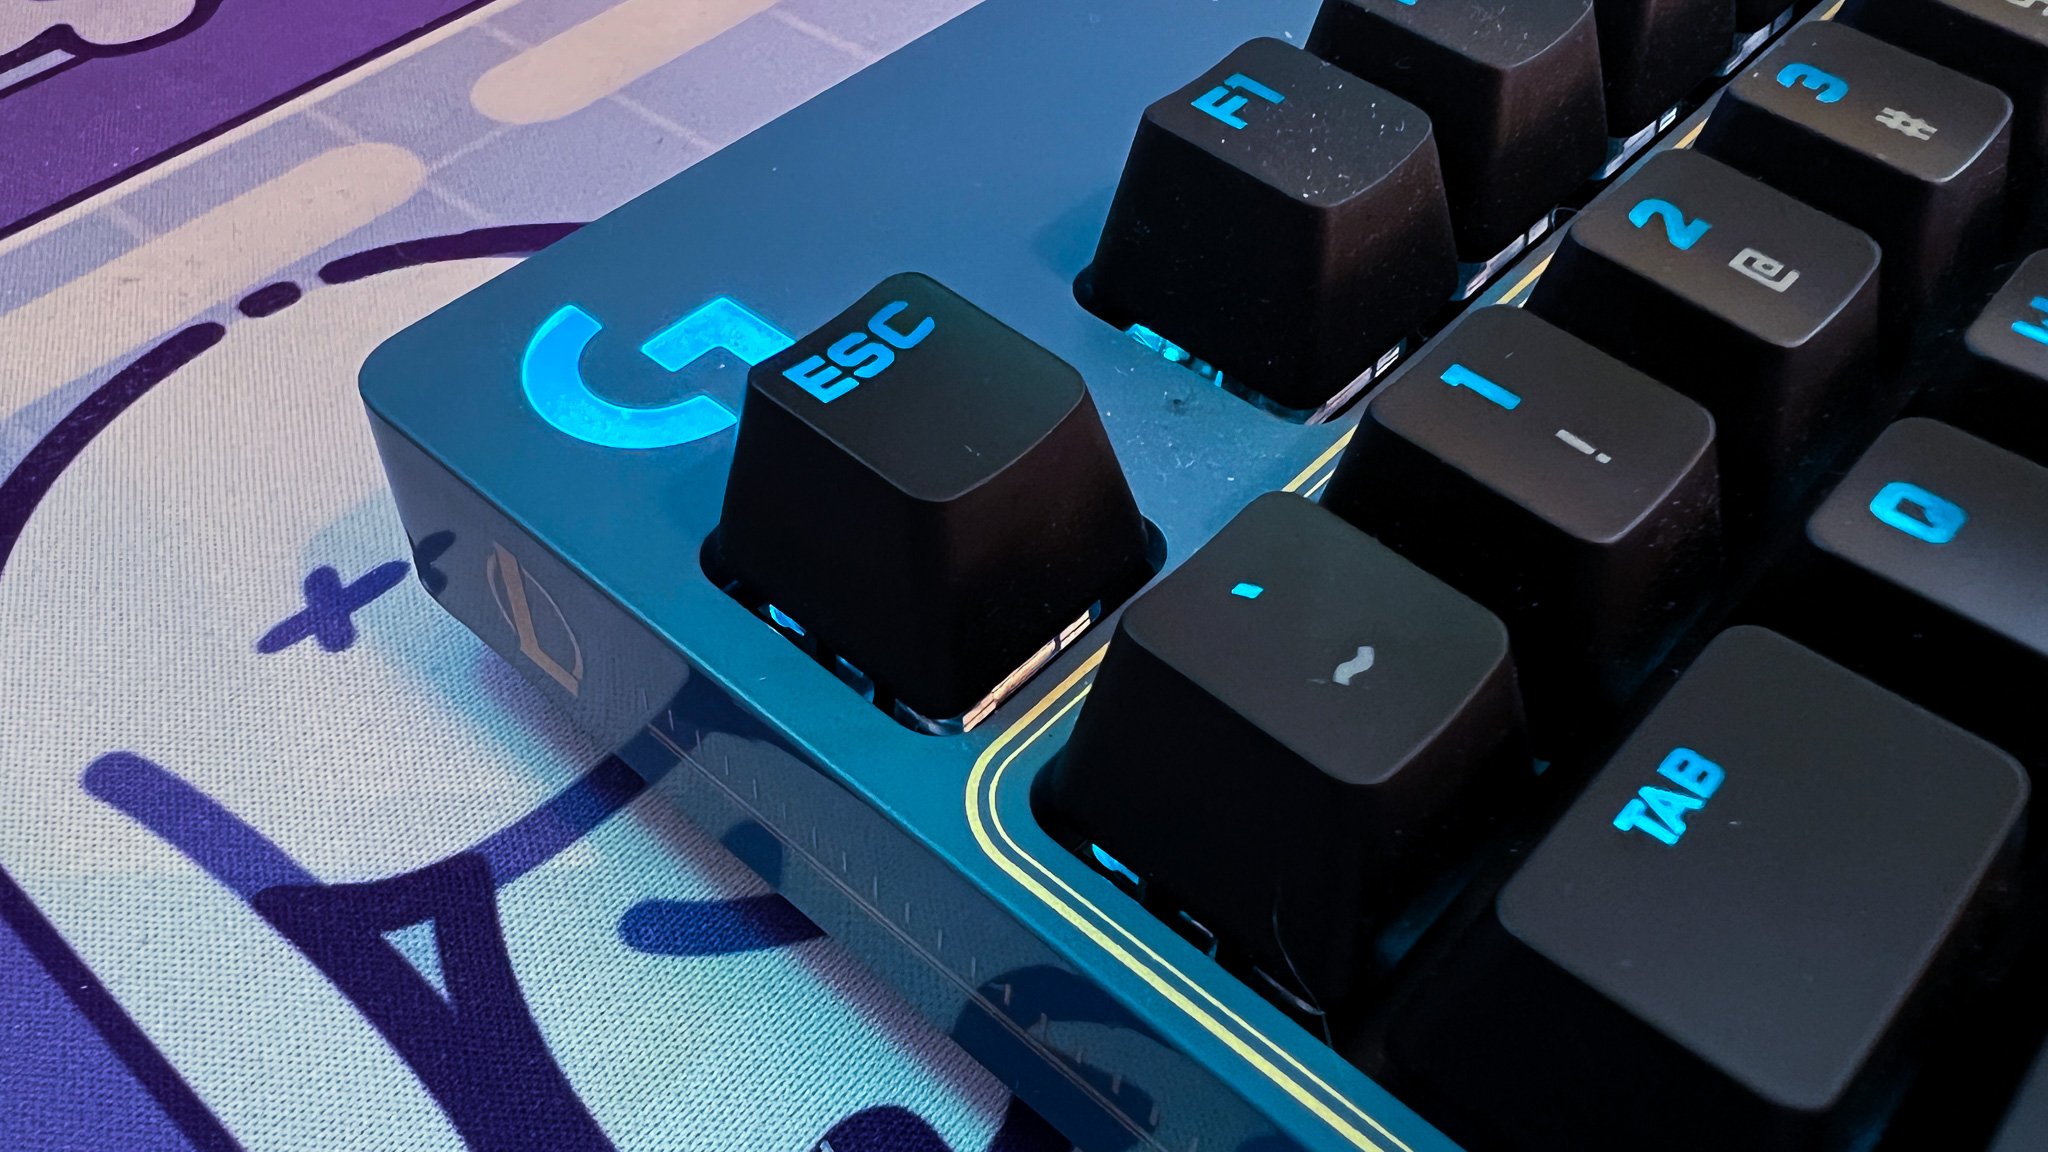 Logitech G512 Mechanical Gaming Keyboard - Fast, Responsive, and